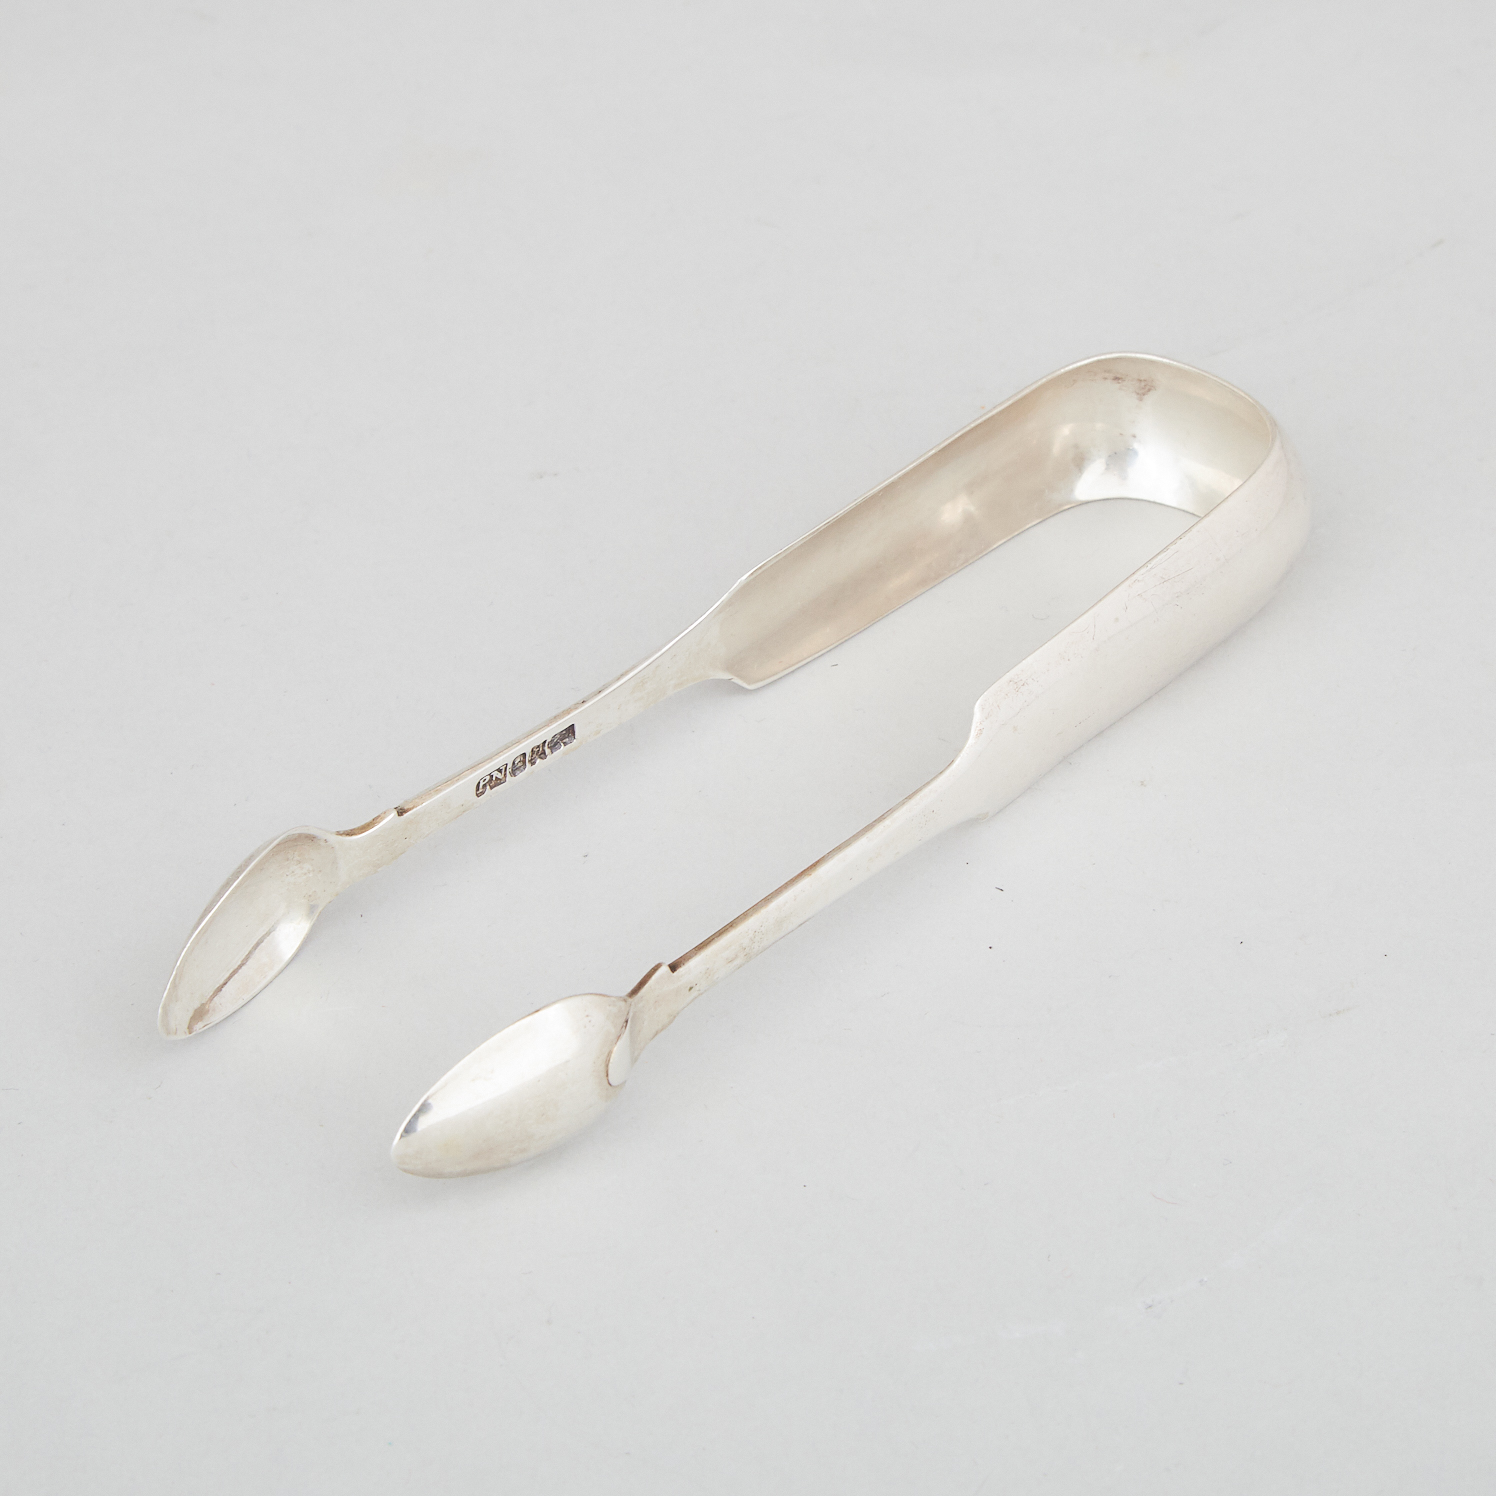 Canadian Silver Fiddle Pattern Sugar Tongs, Peter Nordbeck, Halifax, N.S., mid-19th century